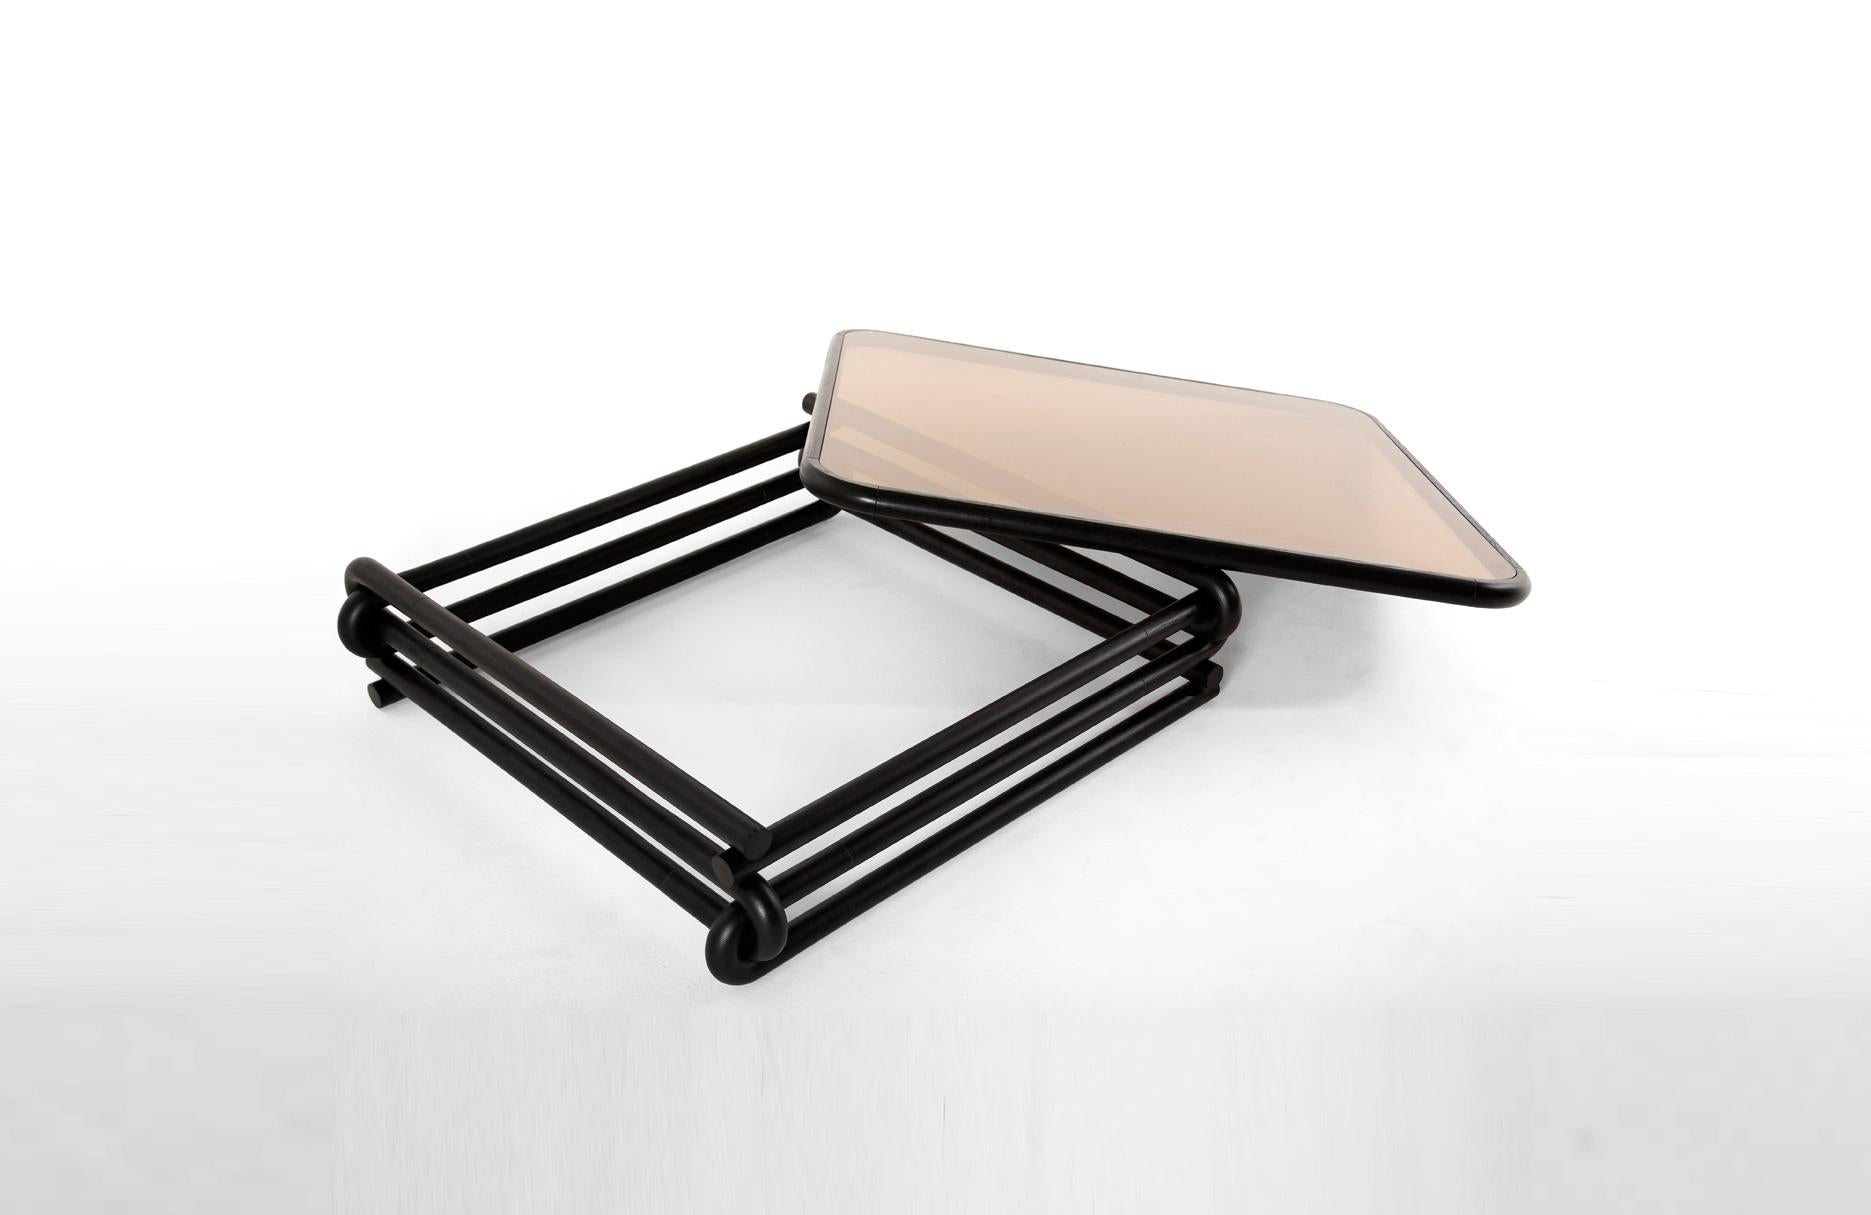 Eight U-shaped curves interlock each other to create a square base structure. A series of bevels etched into the table help to emphasize the attaching points. A double pane bronze glass top is bordered with eased hardwood edges. Café Con Leche is